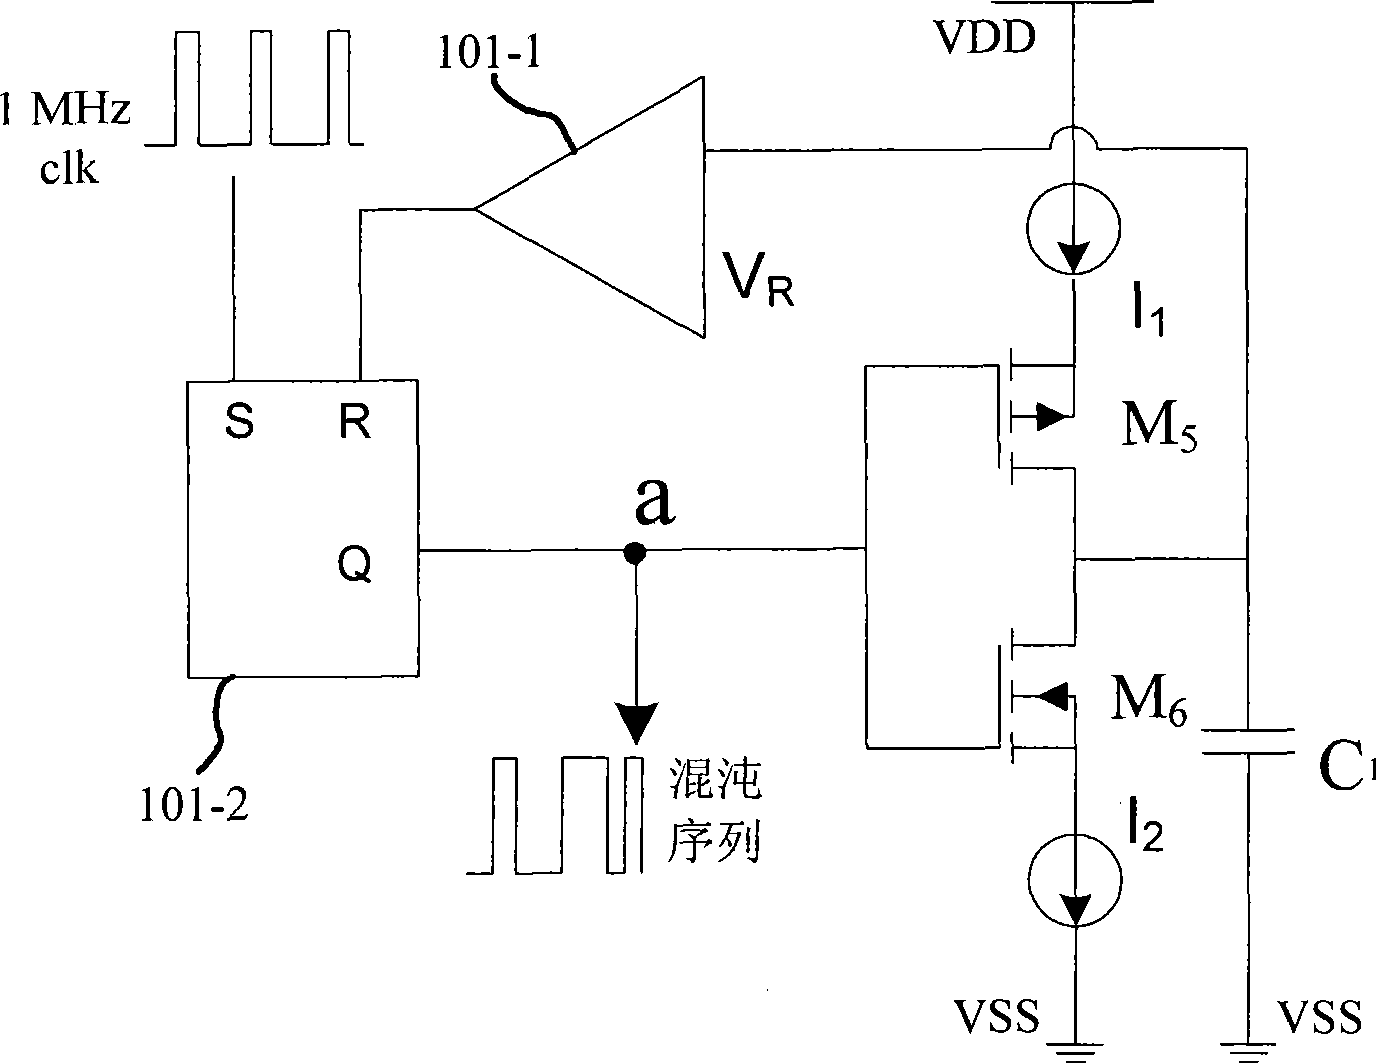 Non-filter D type audio amplifier based on chaotic spread-spectrum modulation technique